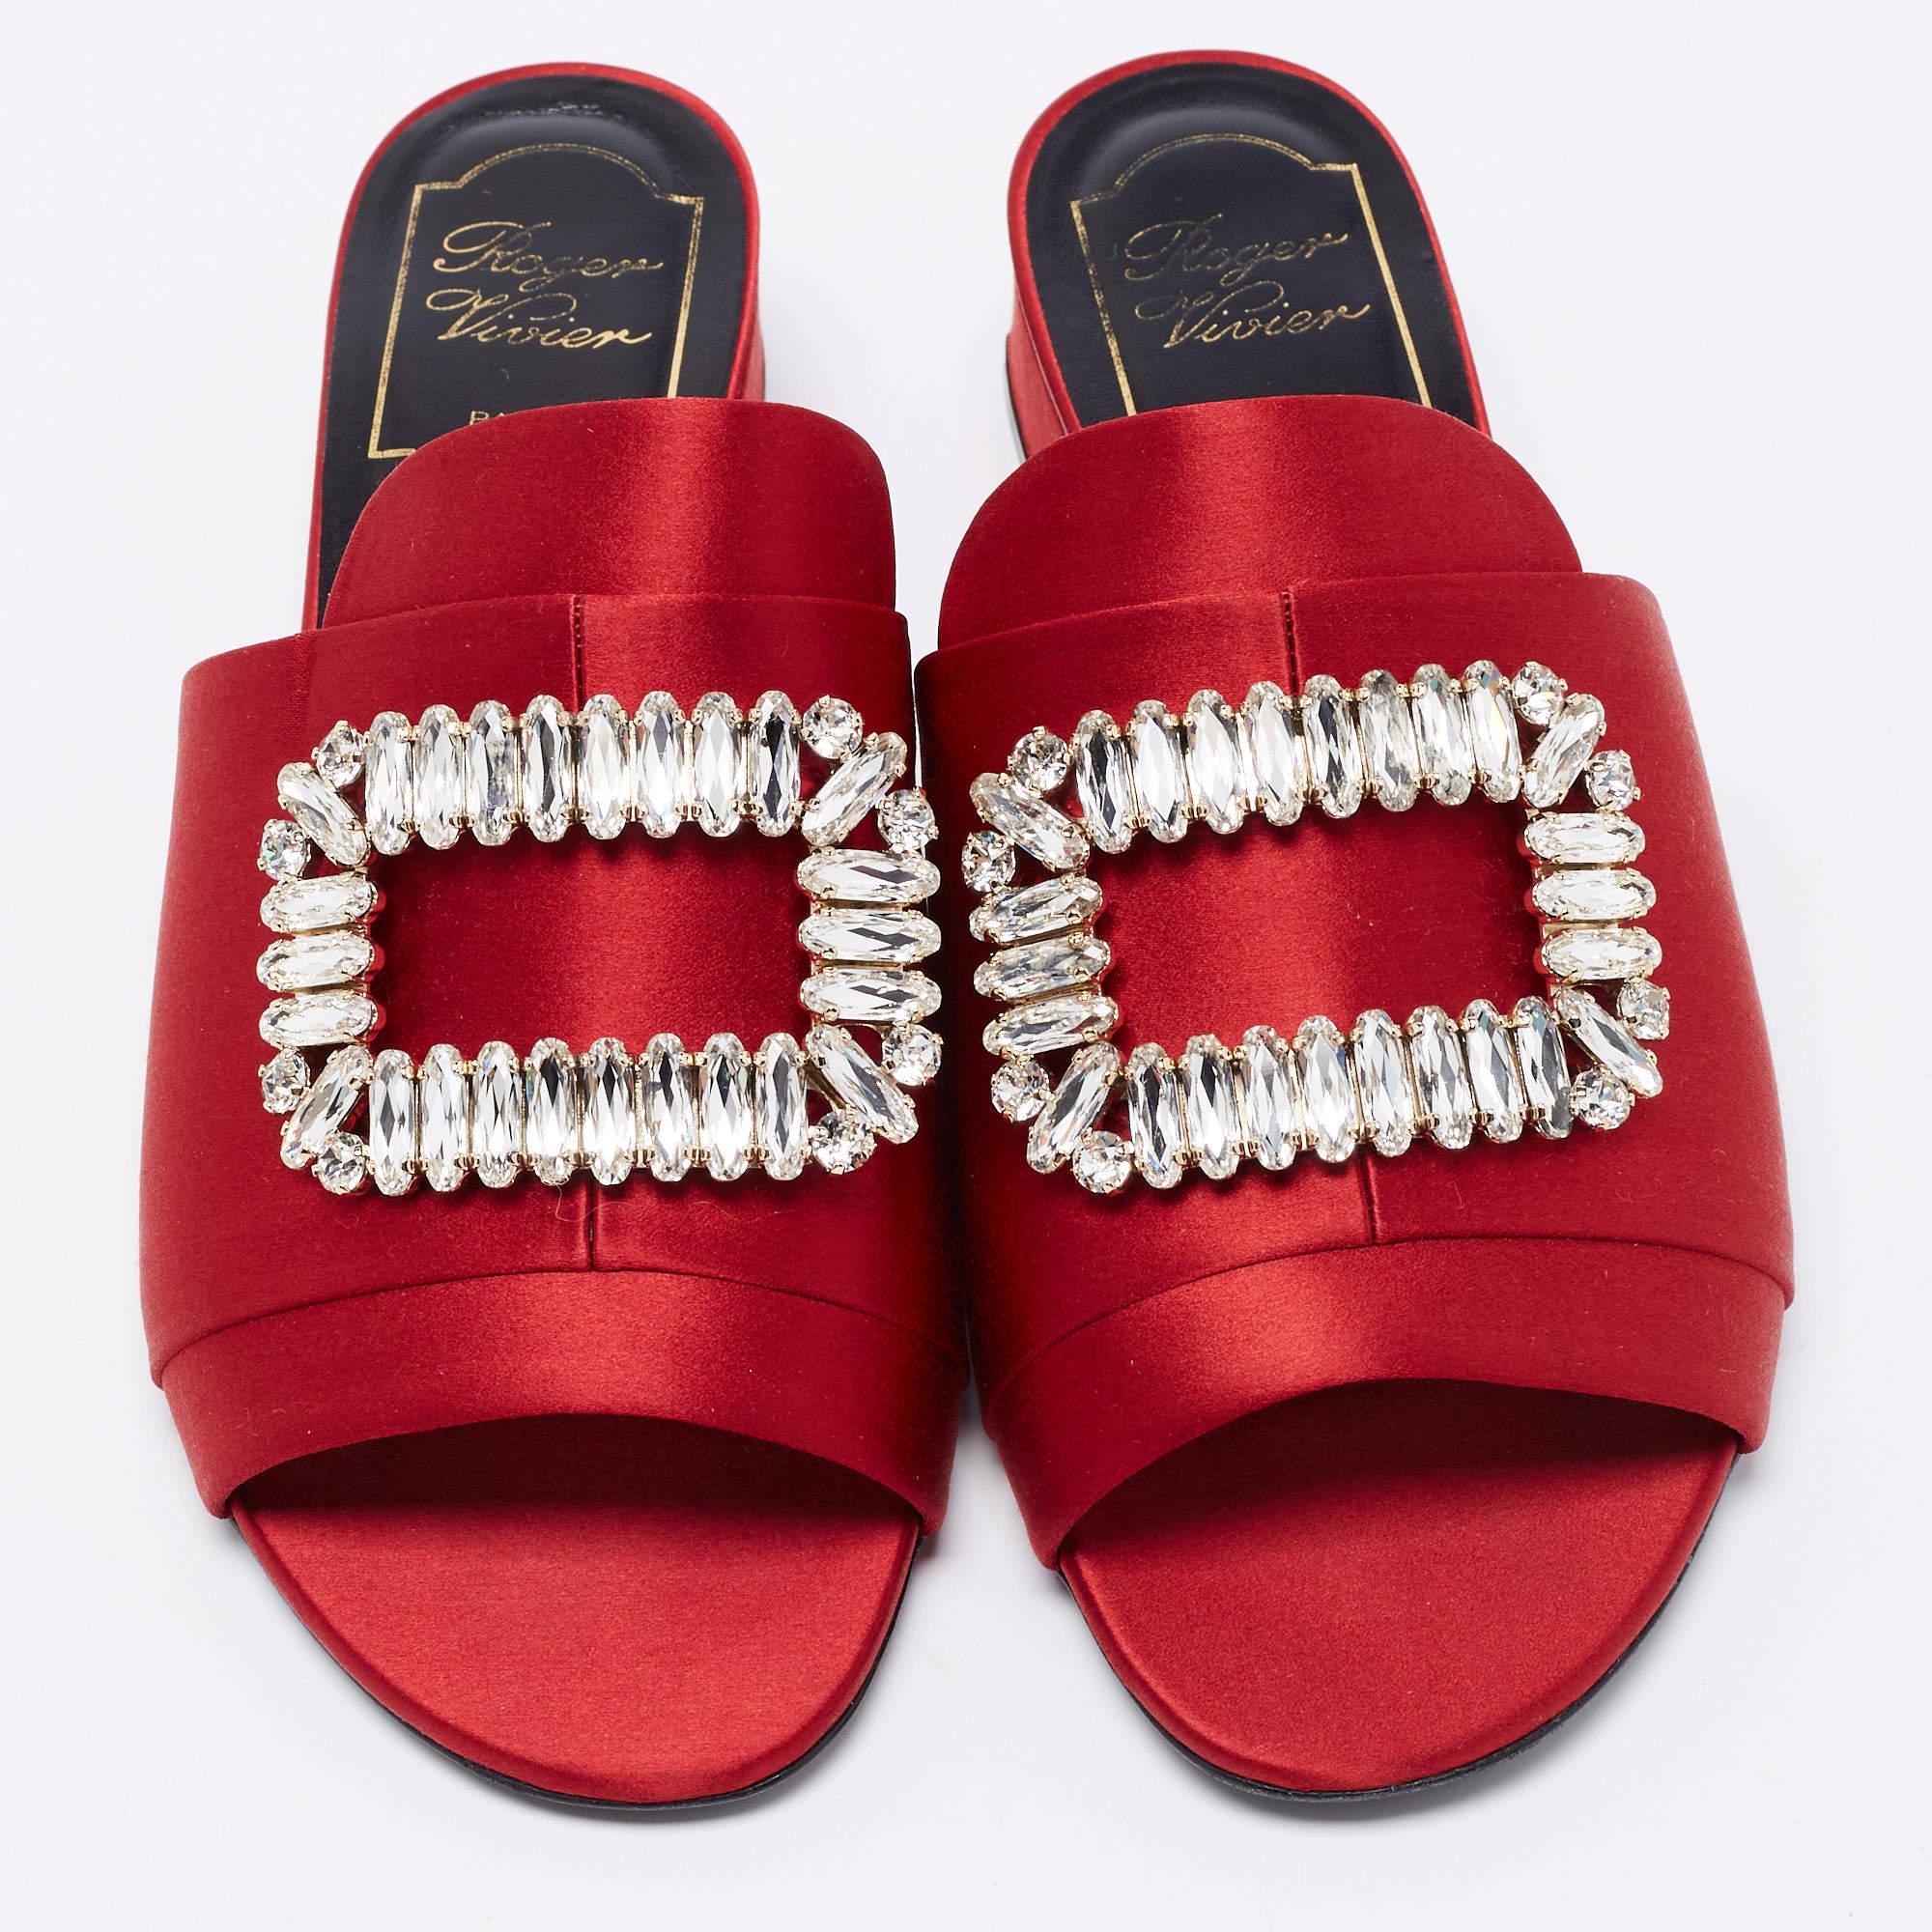 Lend your feet with complete comfort, style, and luxury with these stunning slide sandals from Roger Vivier. They are crafted using red satin, with crystal embellishments perched on the upper. They flaunt open toes, a slip-on style, and block heels.